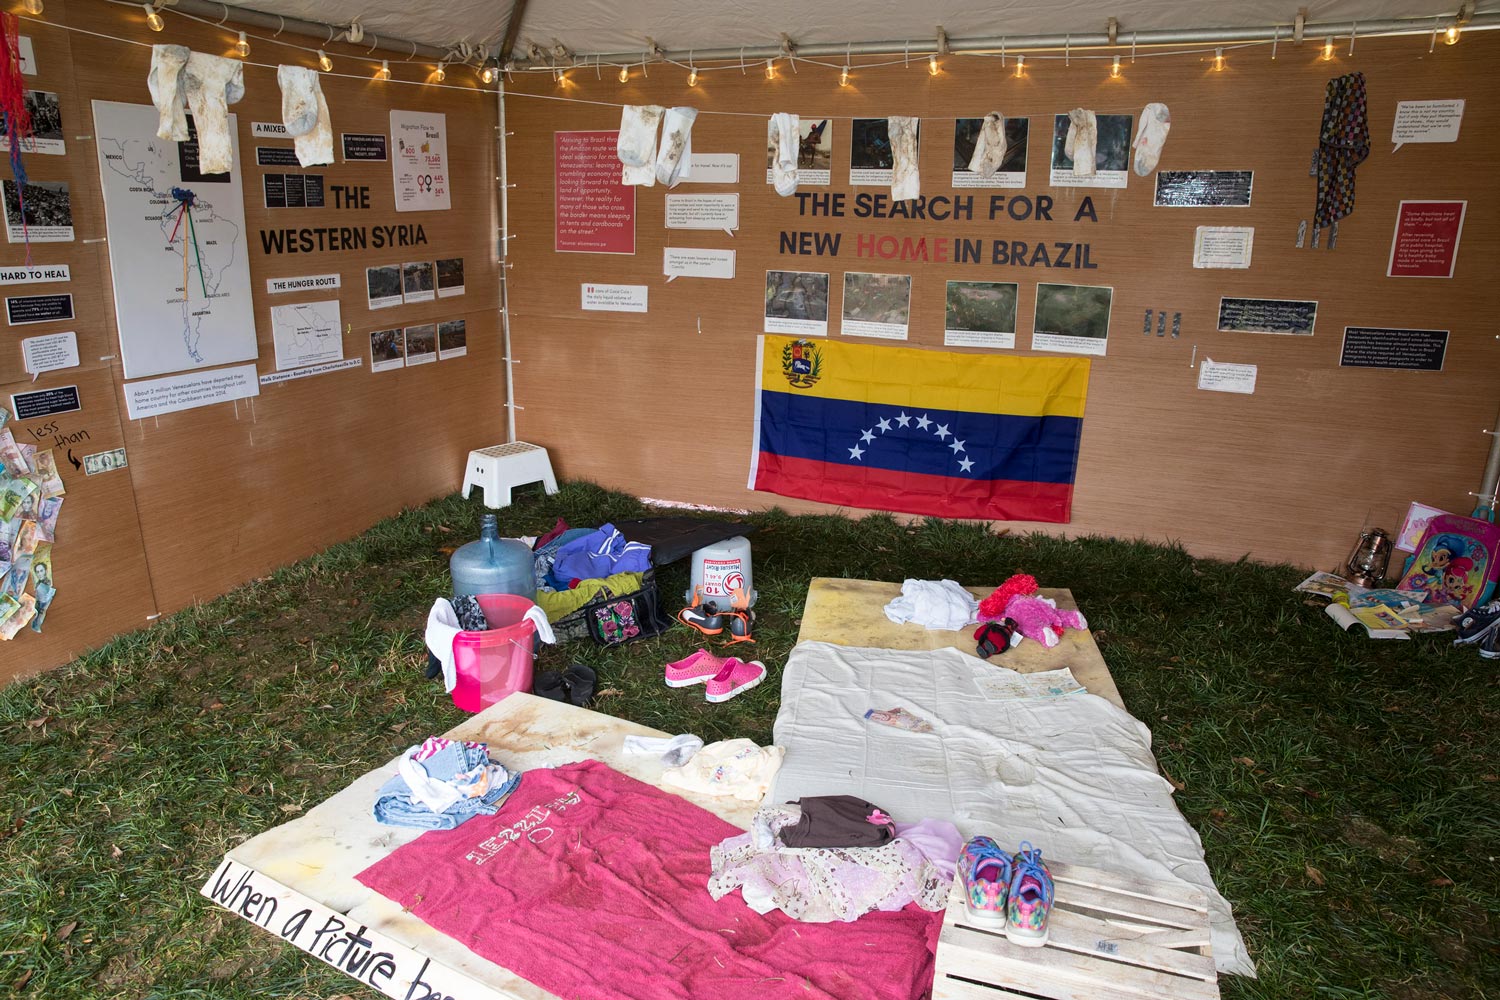 Tent with cardboard walls that has text, images, and dirty socks handing up.  On the ground is personal items and sleeping mats